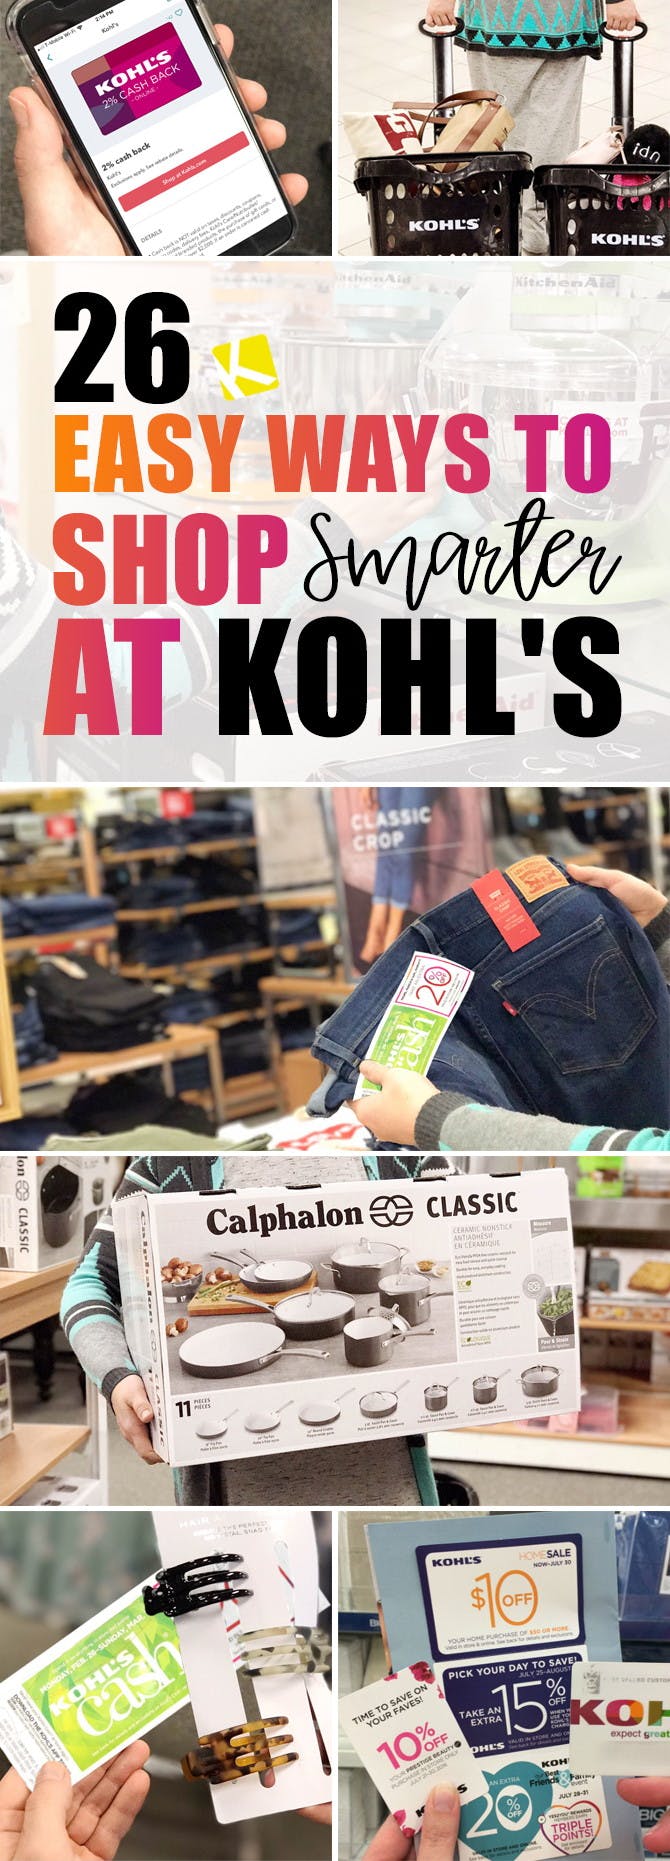 26 Easy Ways to Shop Smarter at Kohl's